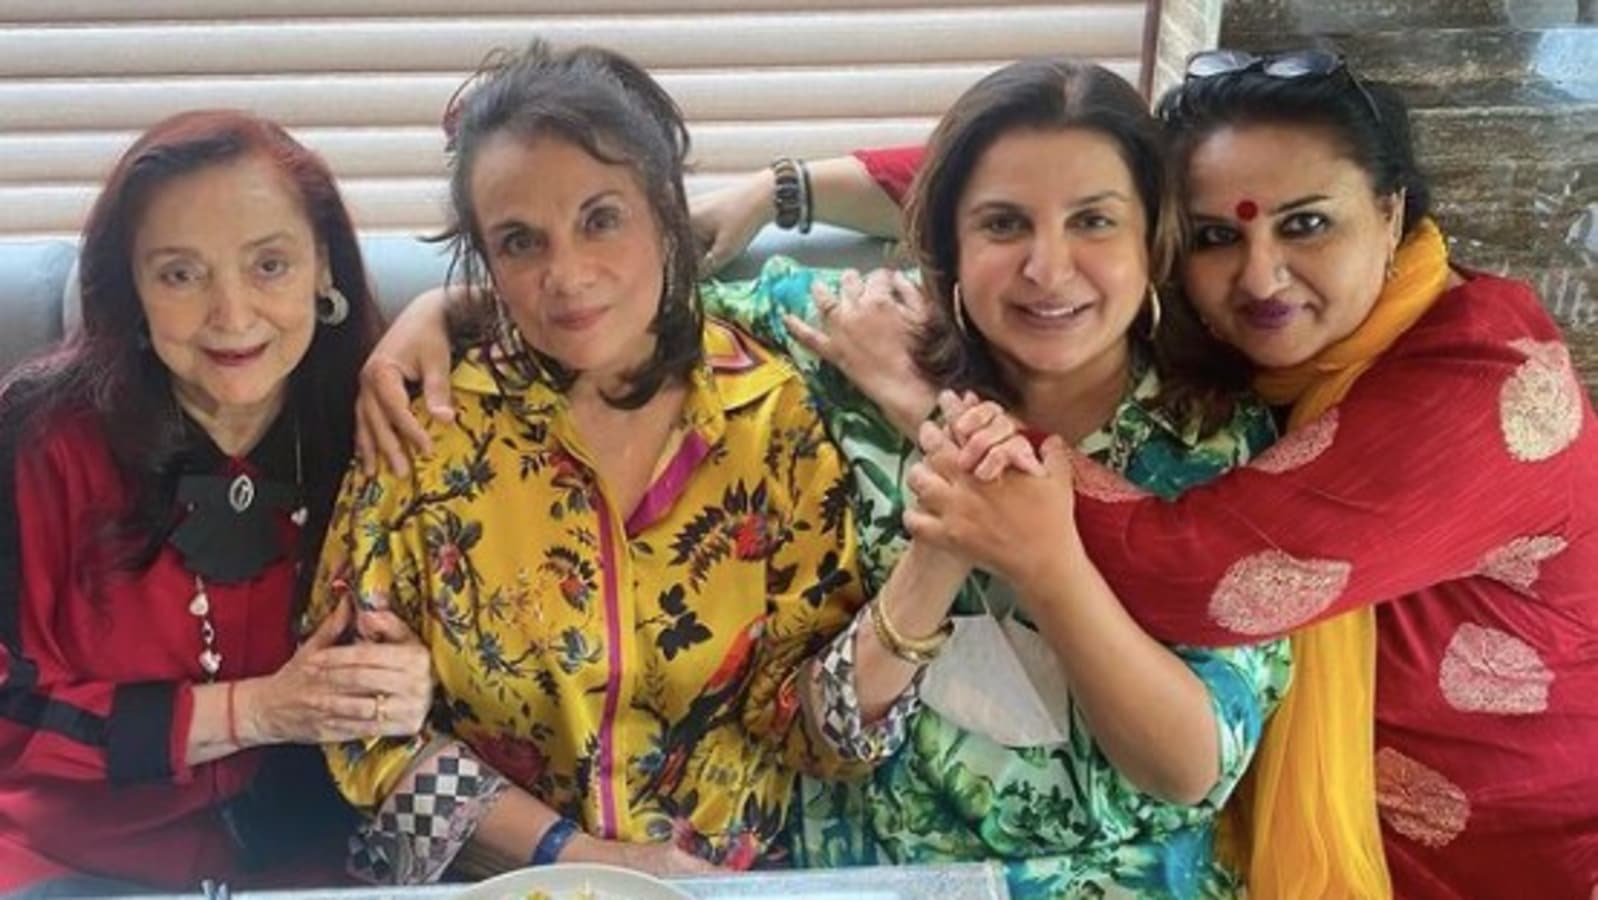 Bollywood Actress Reena Roy Sex Videos - Farah Khan bumps into yesteryear 'icons' Mumtaz, Reena Roy; leaves fans  delighted with pic. See here | Bollywood - Hindustan Times